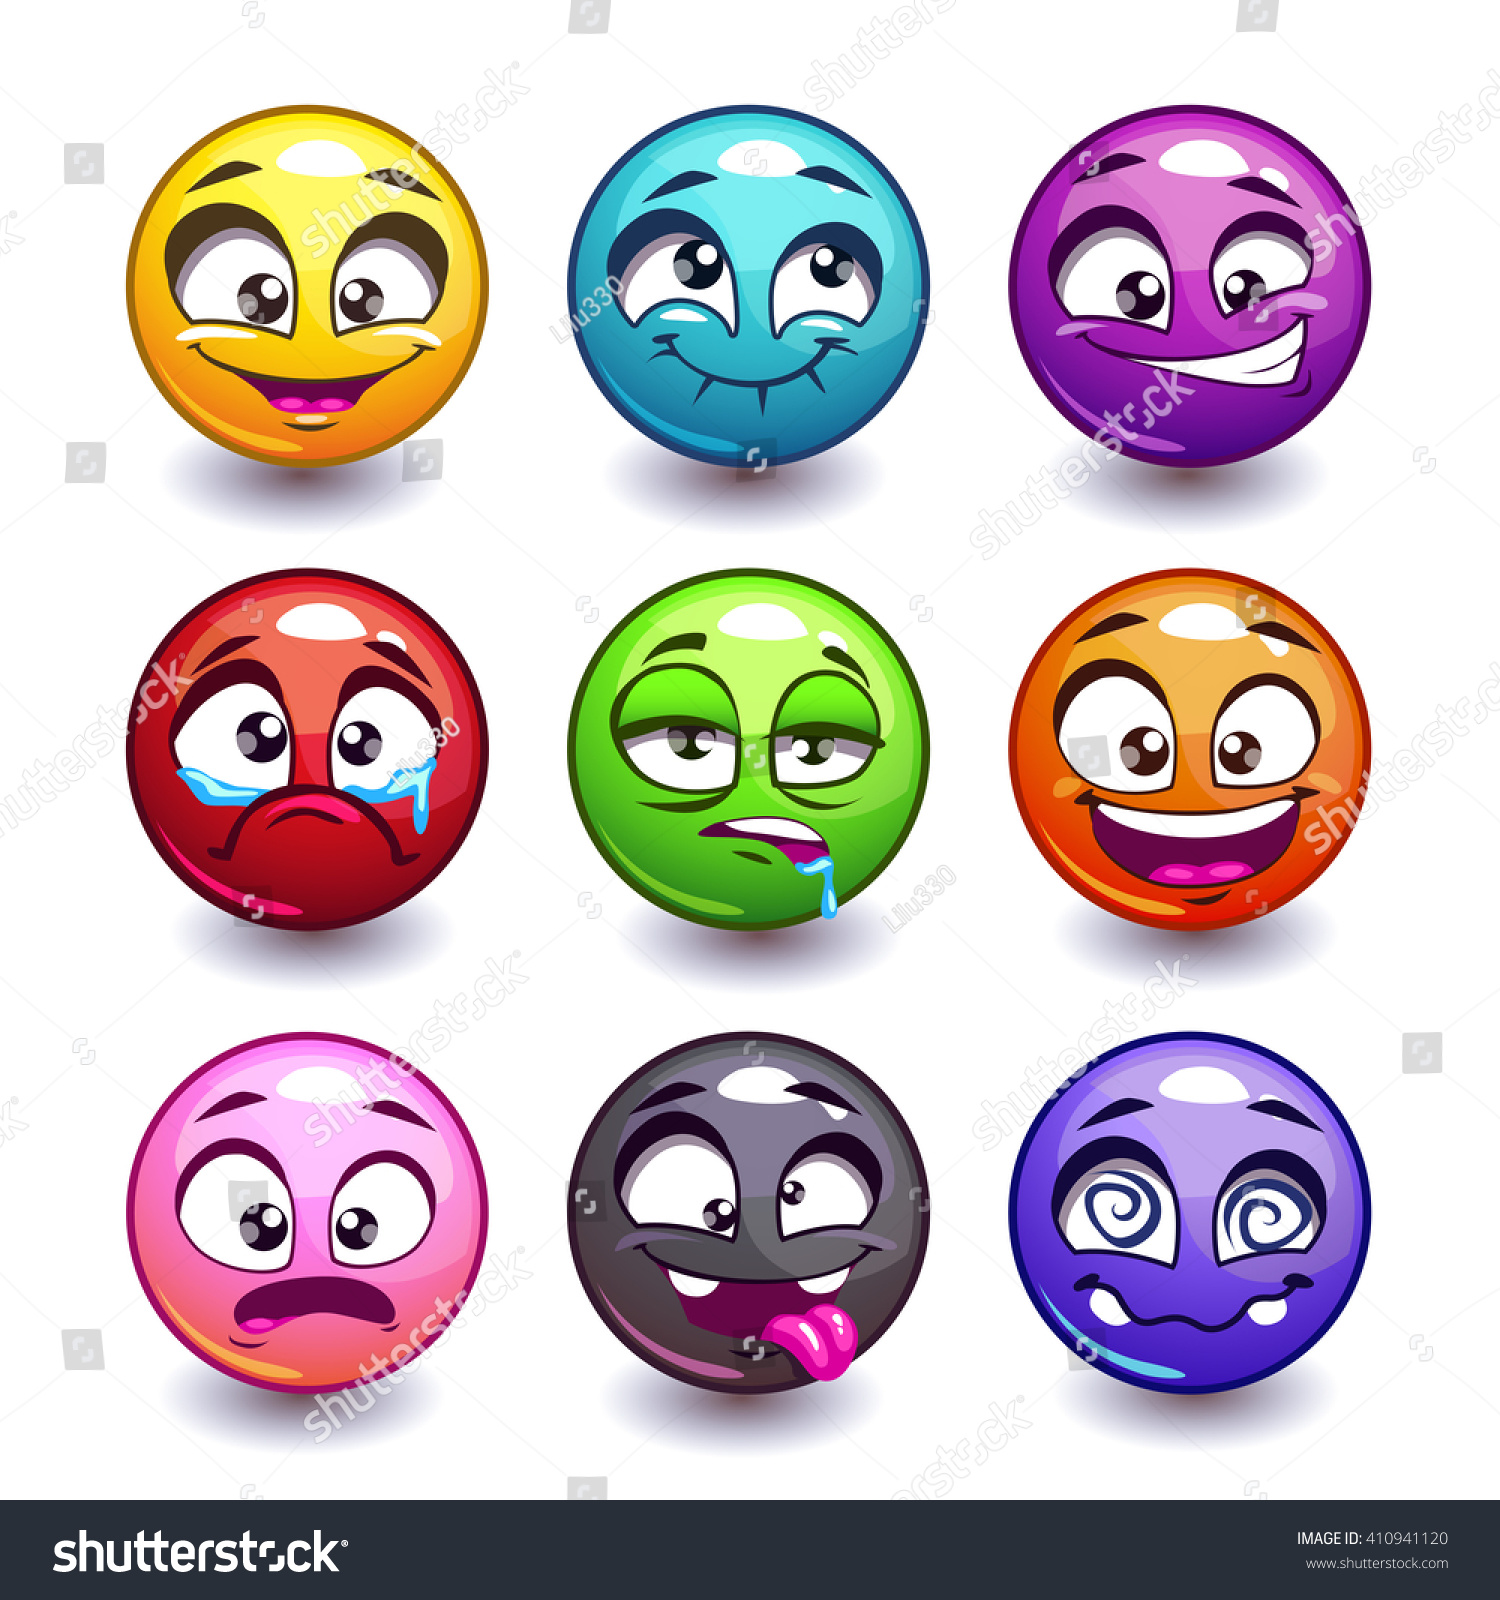 Funny Colorful Round Faces Set Cartoon Stock Vector Royalty Free